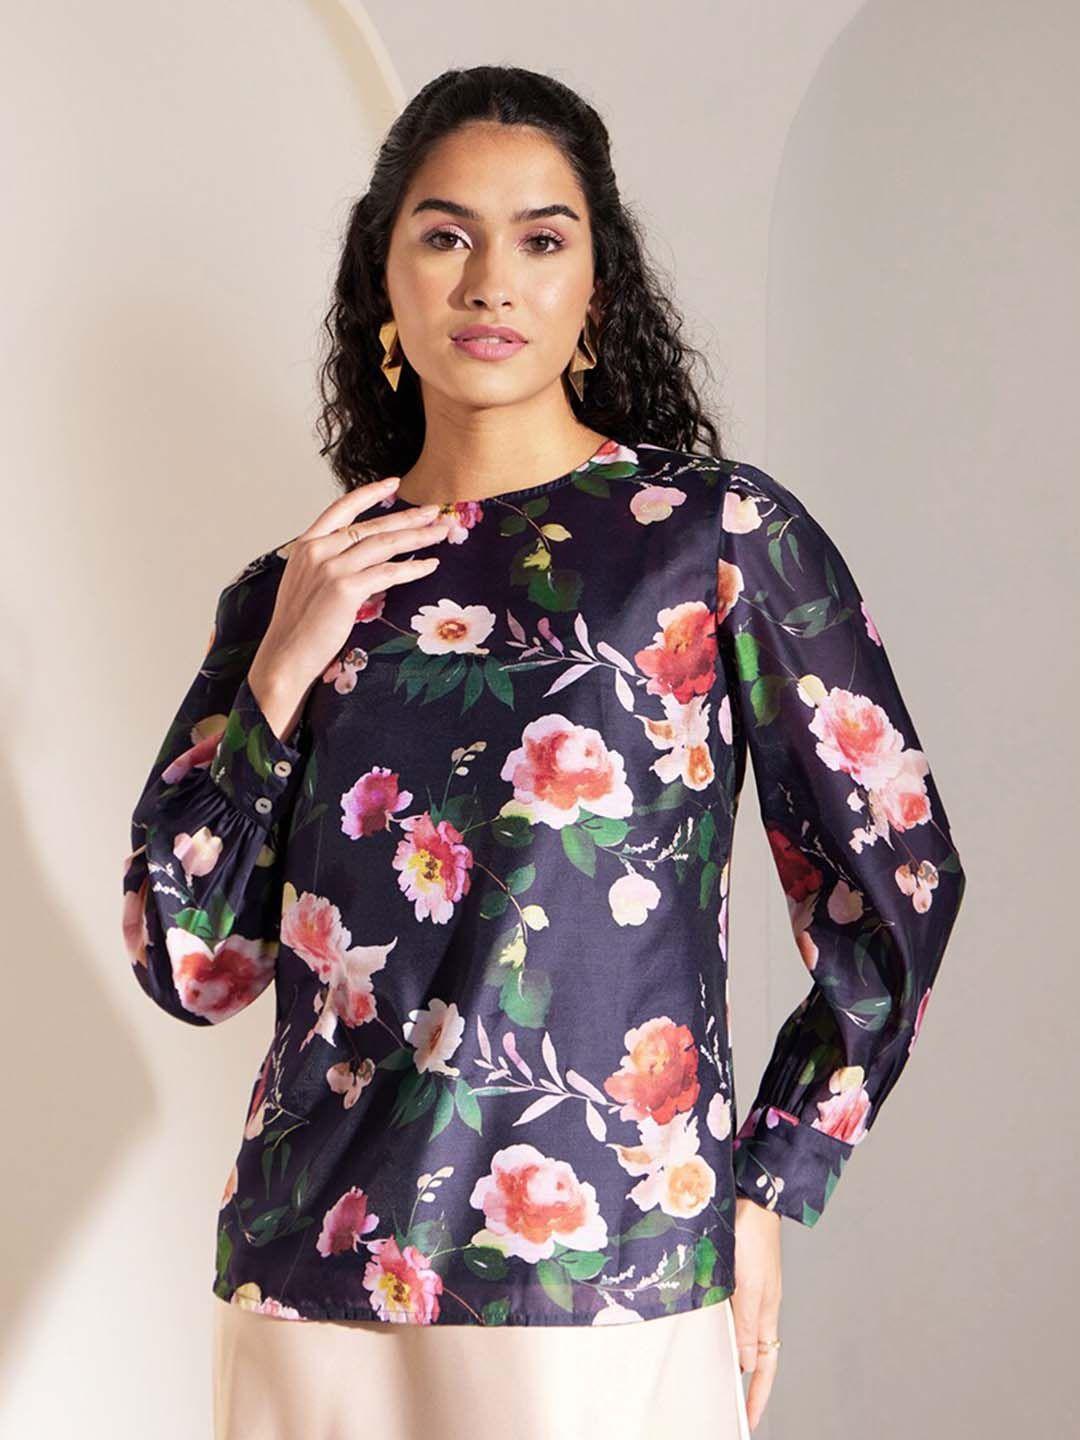 fablestreet-floral-printed-cuffed-sleeves-top